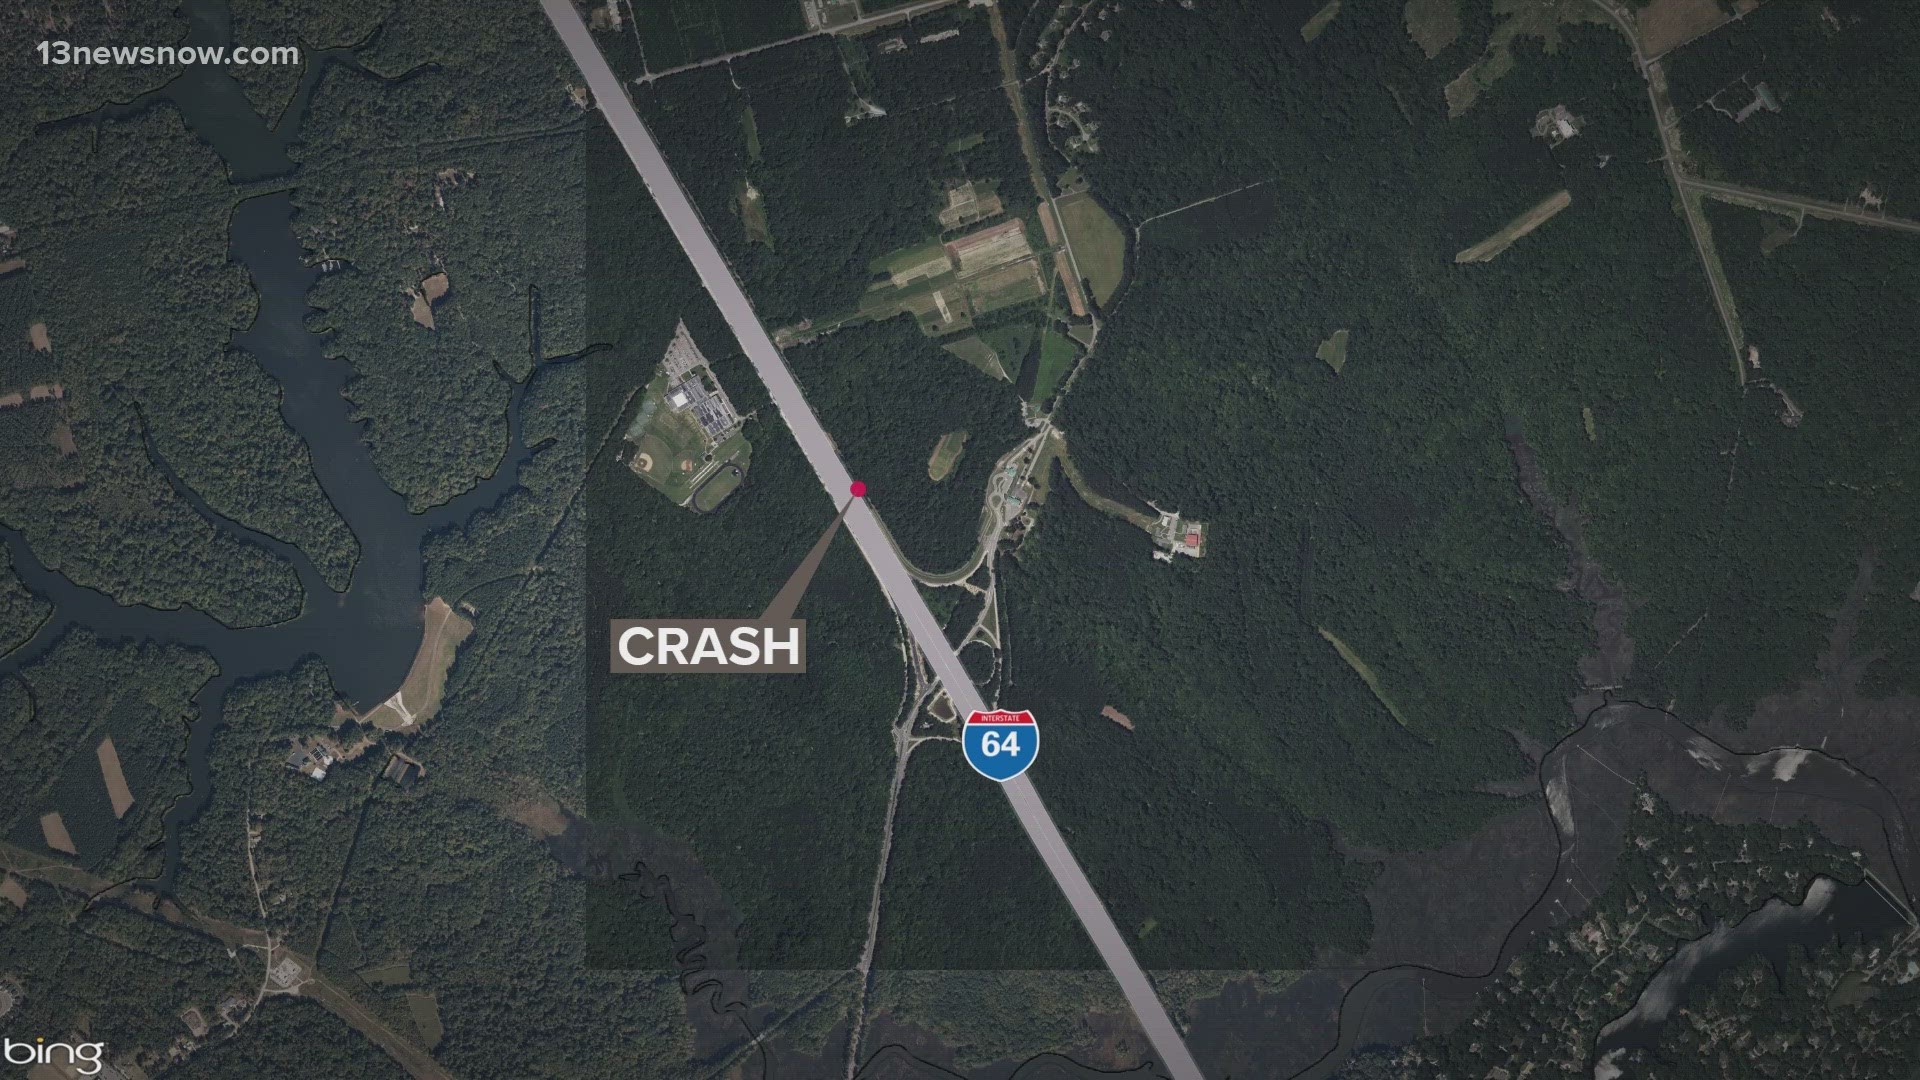 At least one person was killed in the collision that happened near the 241 mile marker, police said.